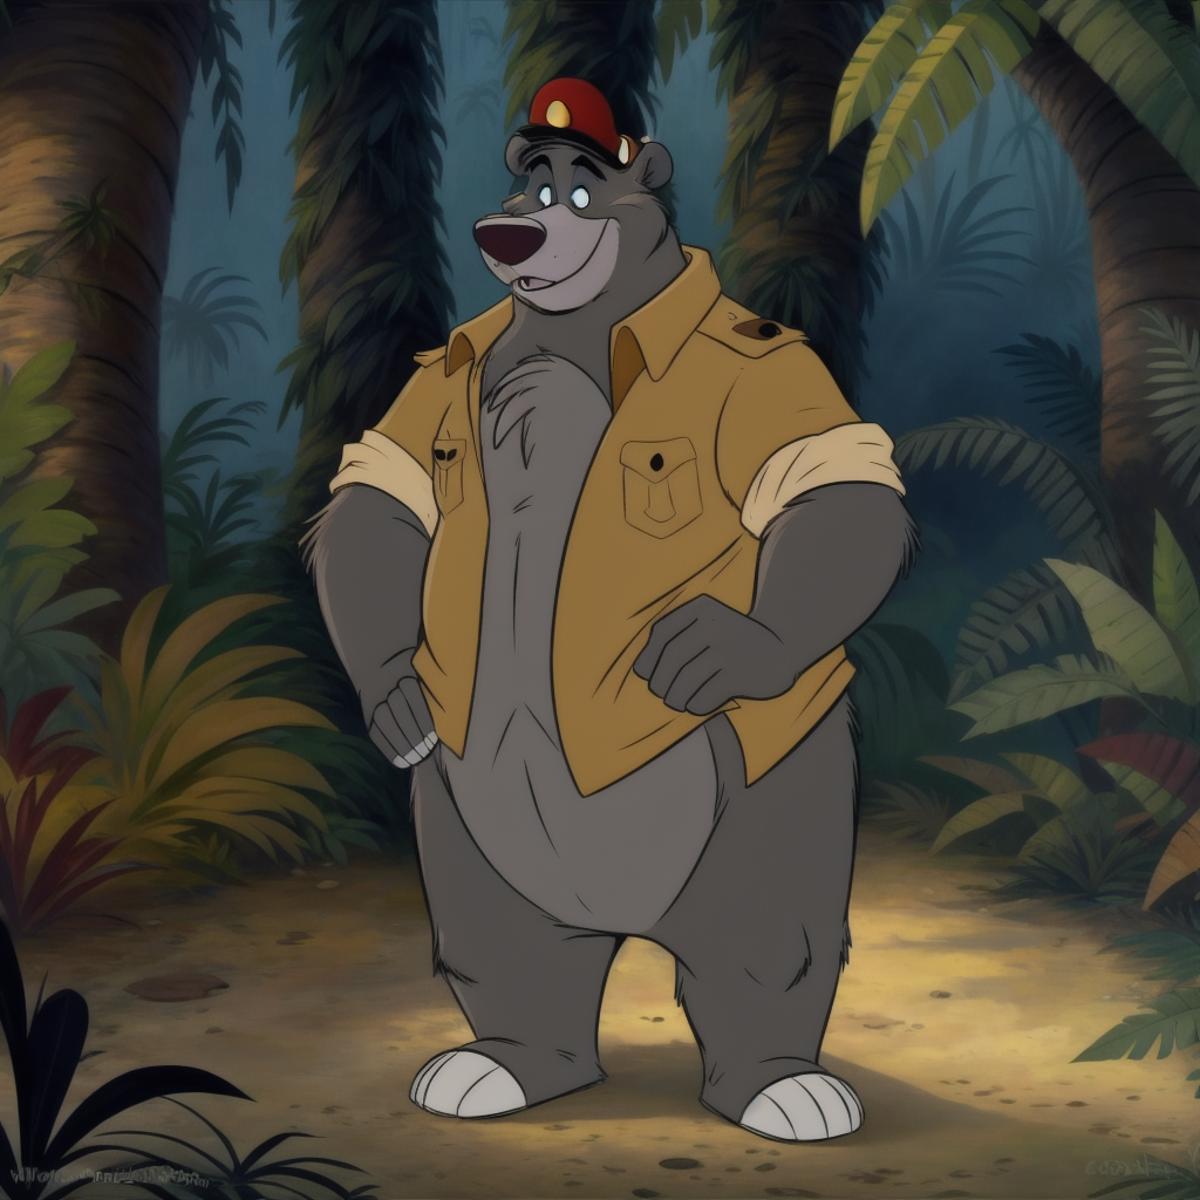 Baloo [ The Jungle Book ] image by Steeltron2000